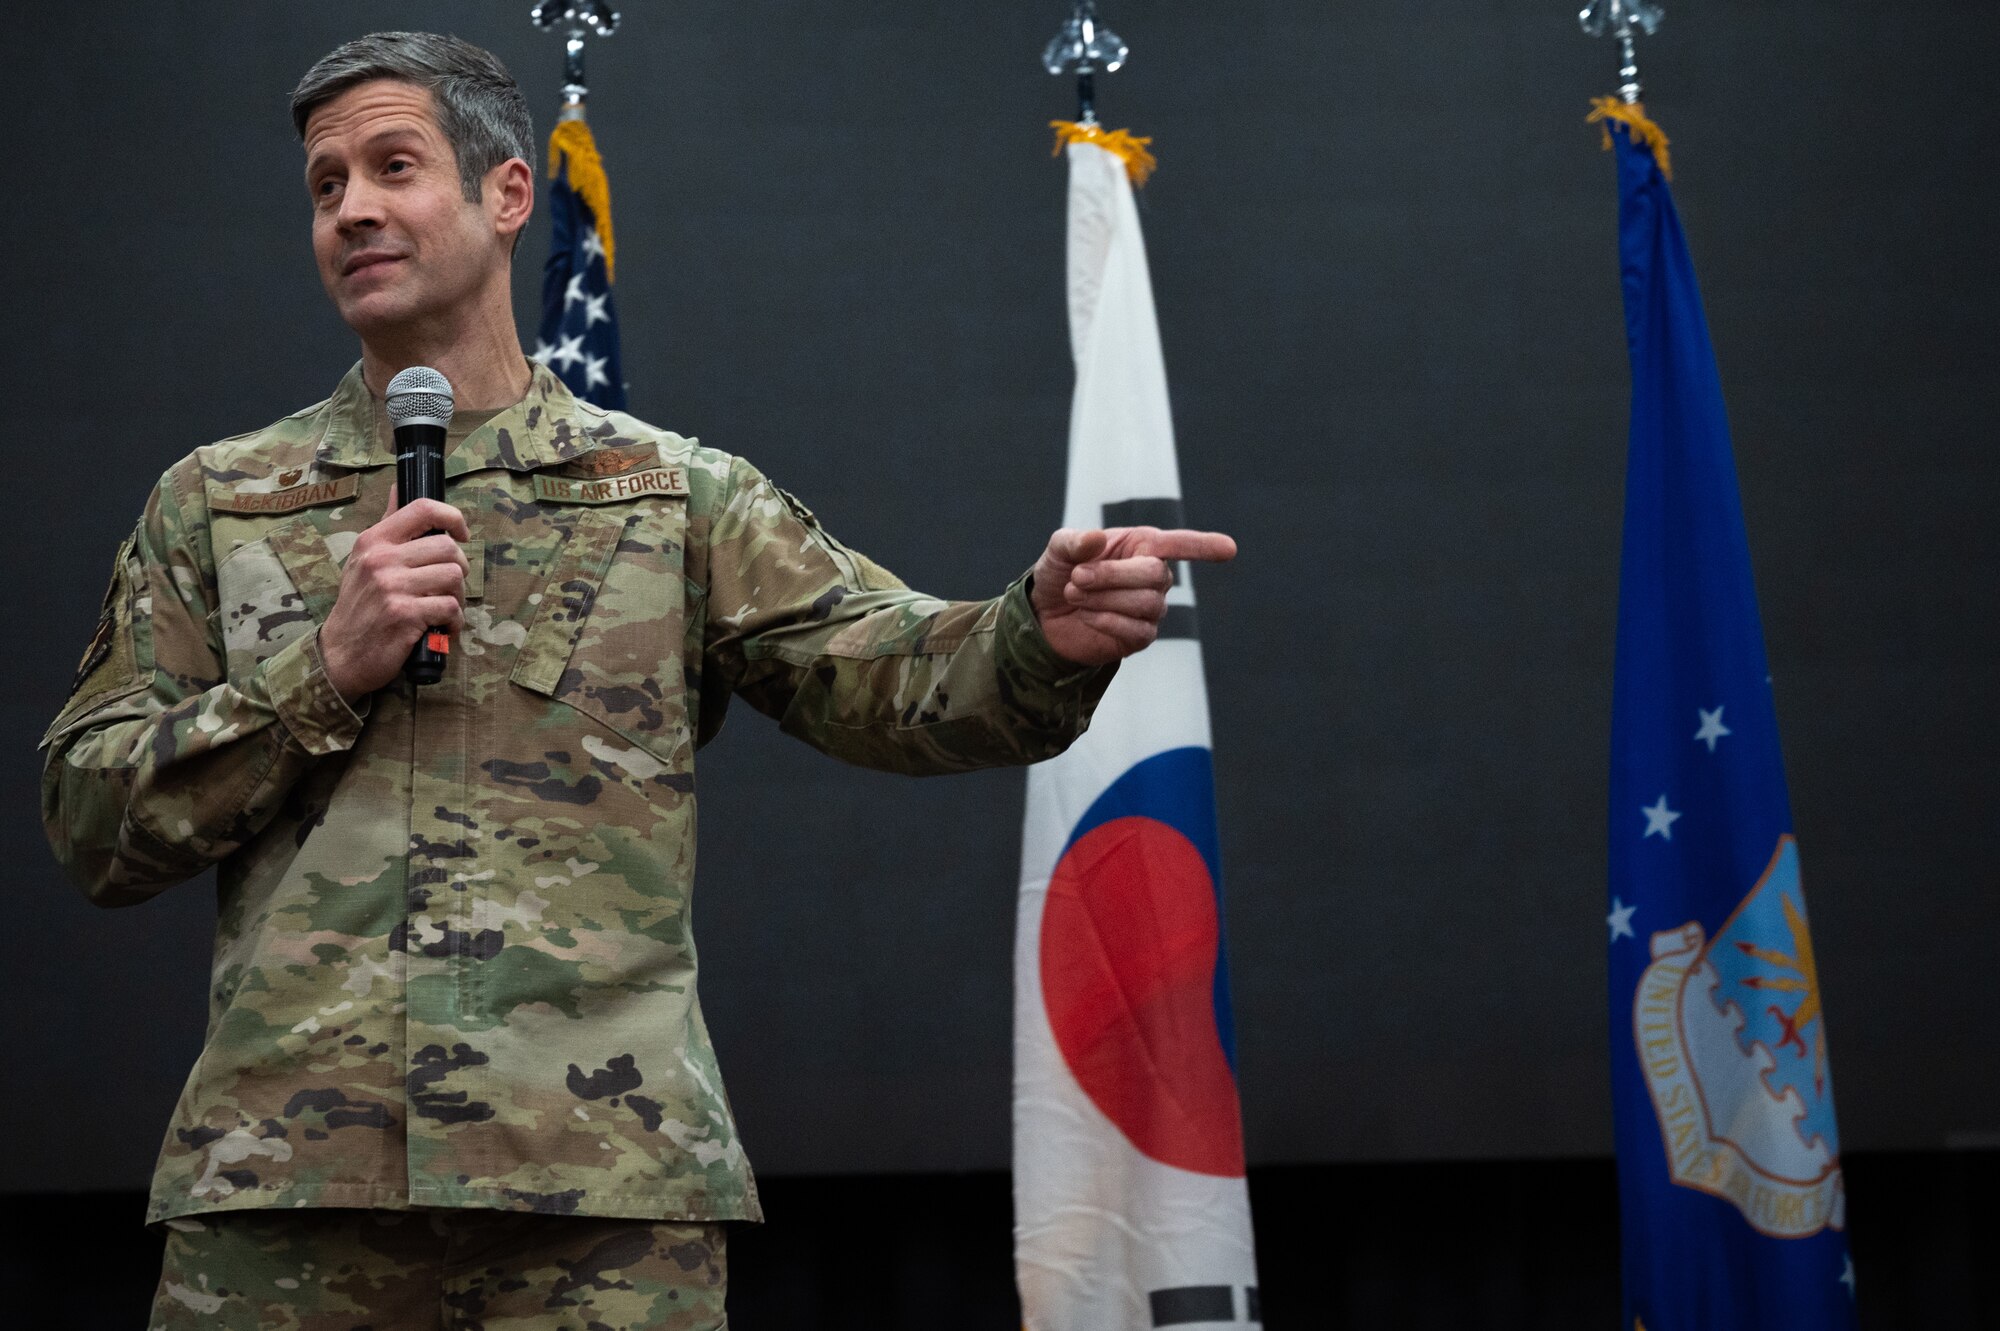 U.S. Air Force Col. William McKibban, 51st Fighter Wing commander, speaks during the 51st FW quarterly awards ceremony at Osan Air Base, Republic of Korea, Jan. 19, 2024. Wing leadership regularly acknowledges outstanding performers, expressing appreciation for their contributions to the "Fight Tonight" mission. (U.S. Air Force photo by Airman 1st Class Chase Verzaal)